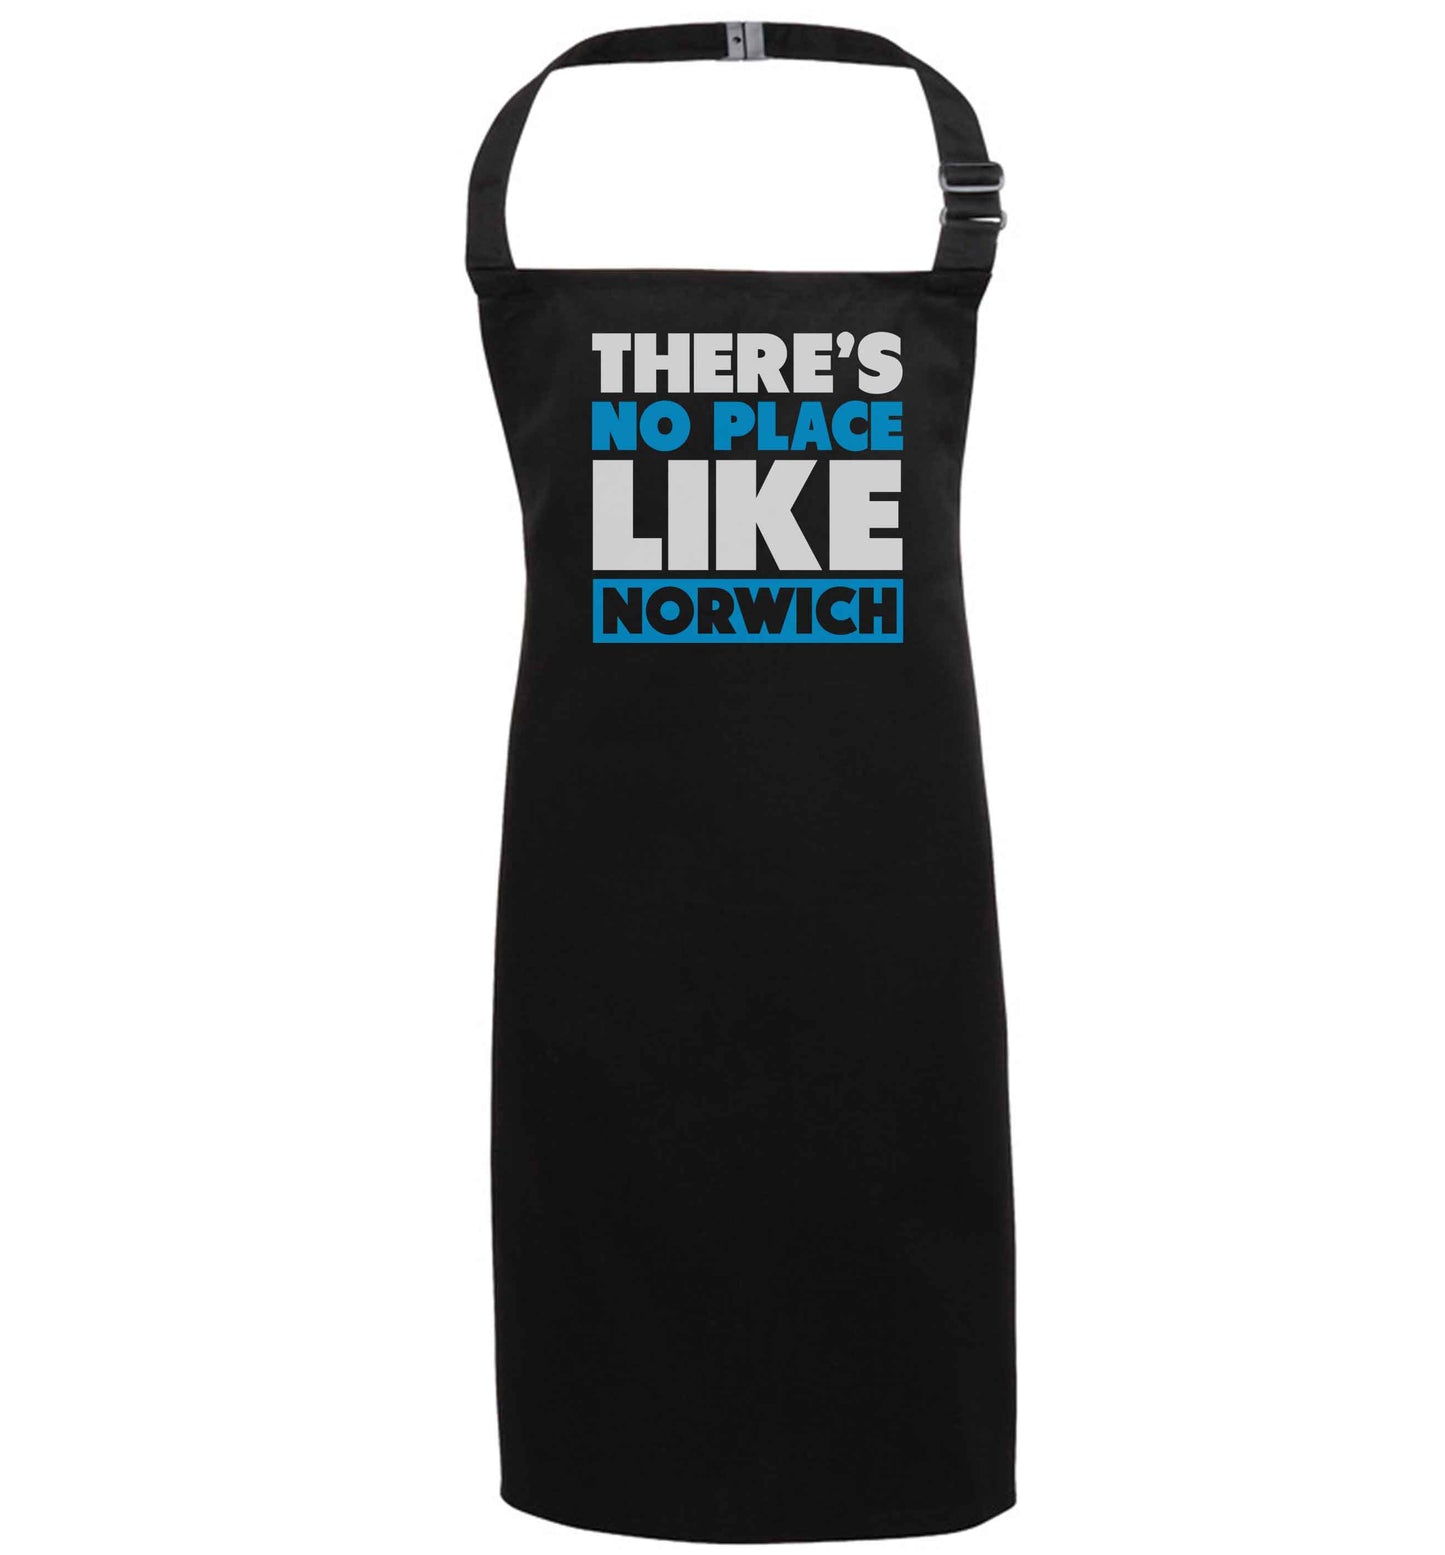 There's no place like Norwich black apron 7-10 years